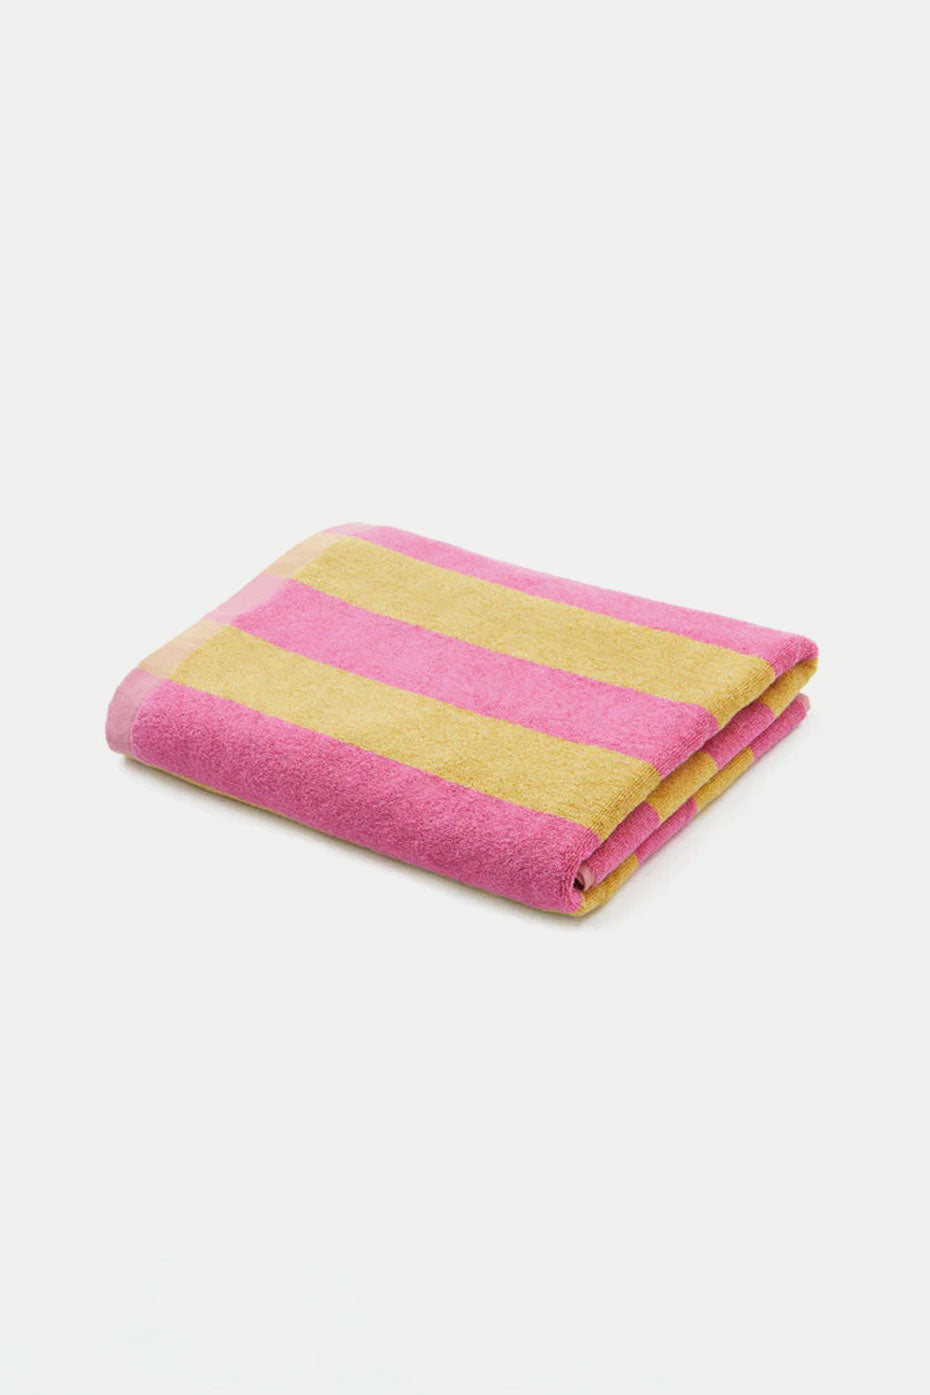 Candy Stripes Towel